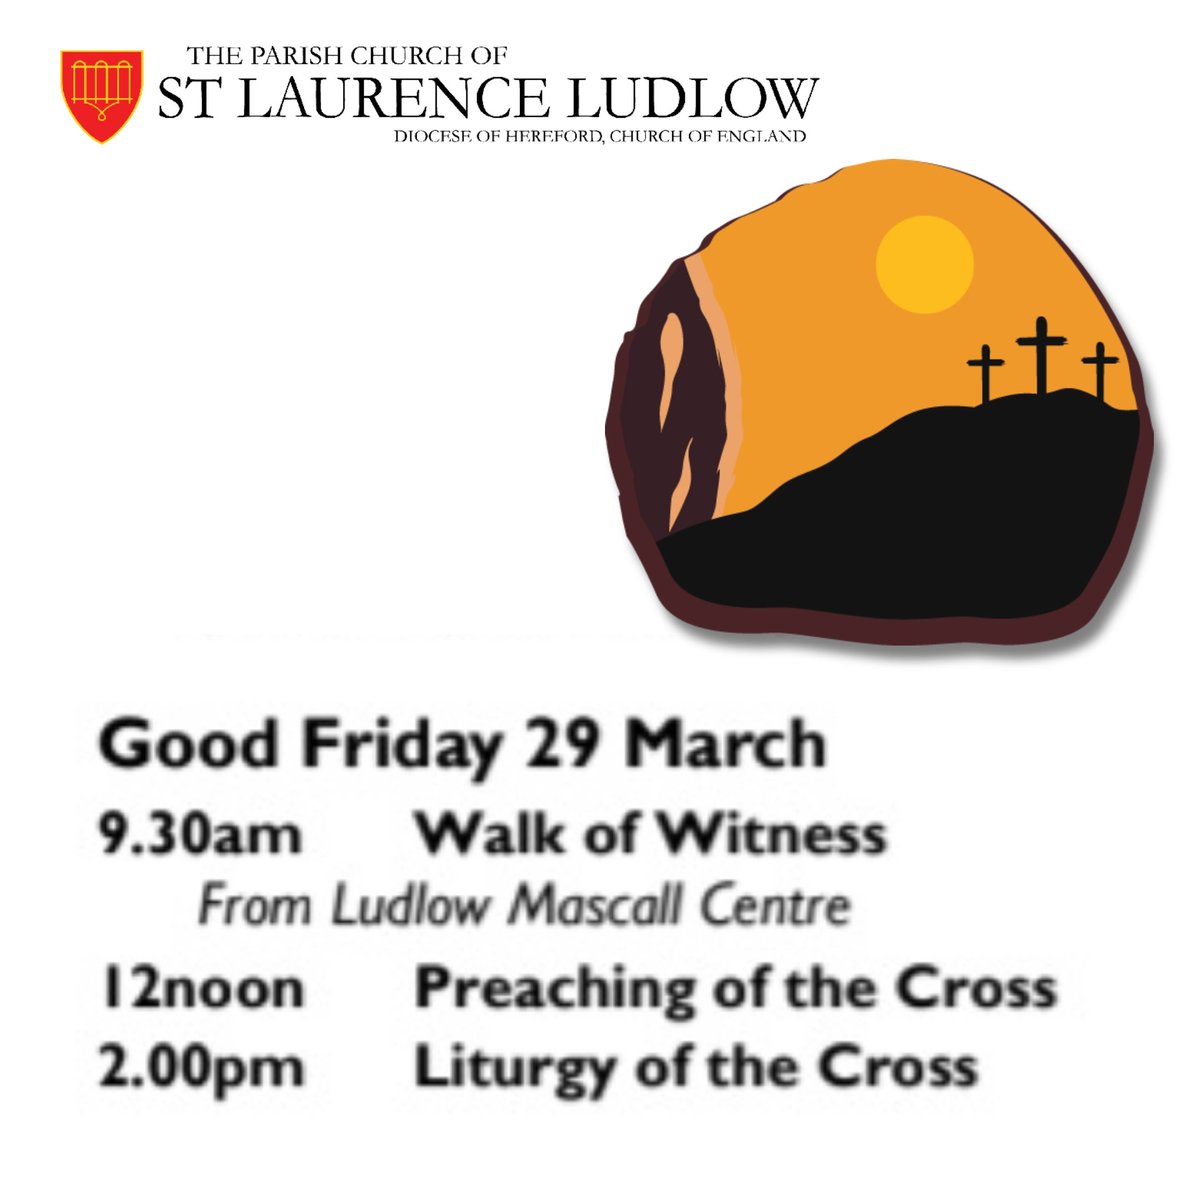 Good Friday is here, with many opportunities for worship - beginning at 9:30am with the Walk of Witness (starting at the Mascall Centre). (Please note: the church will be closed to general visitors between 11:45am-3pm, and the Shop & Icon Coffee are closed all day today.)